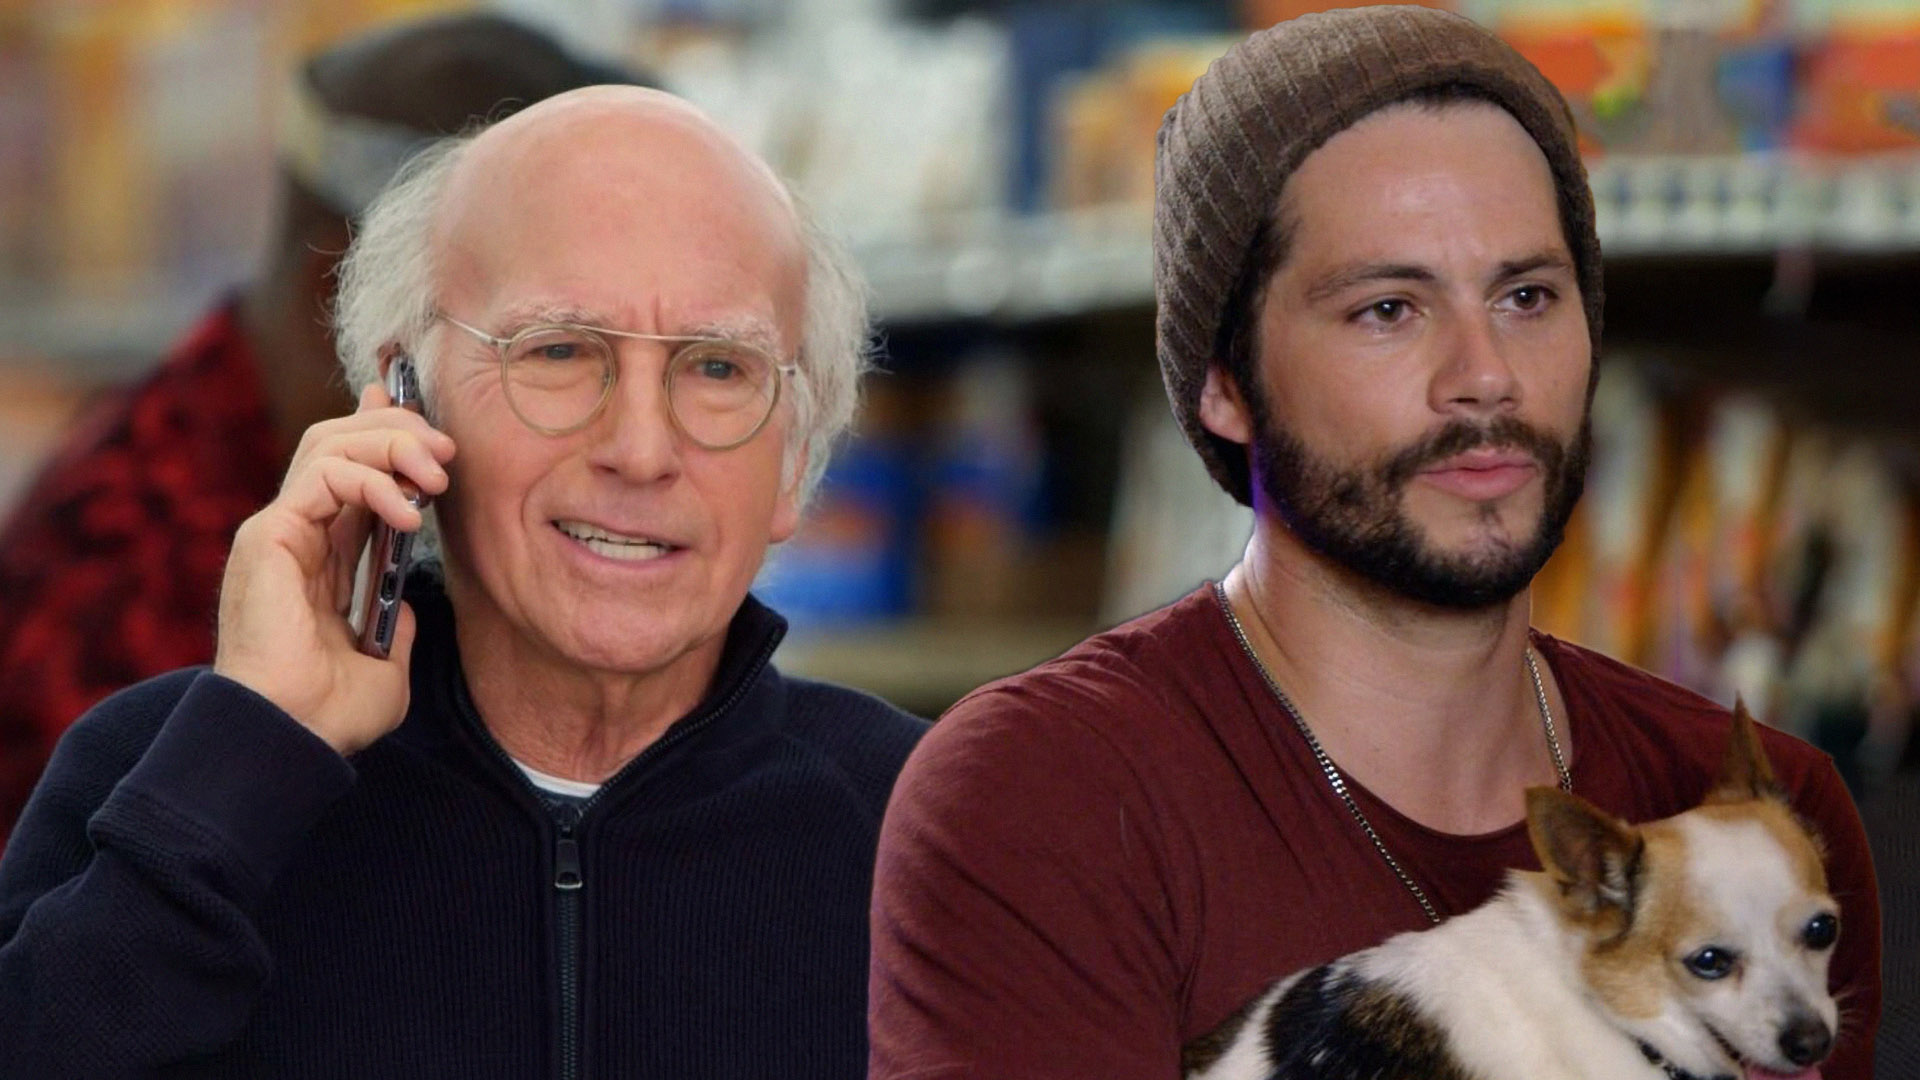 Curb Your Enthusiasm Ending After Season 12? Here's What Show's EP Has to Say